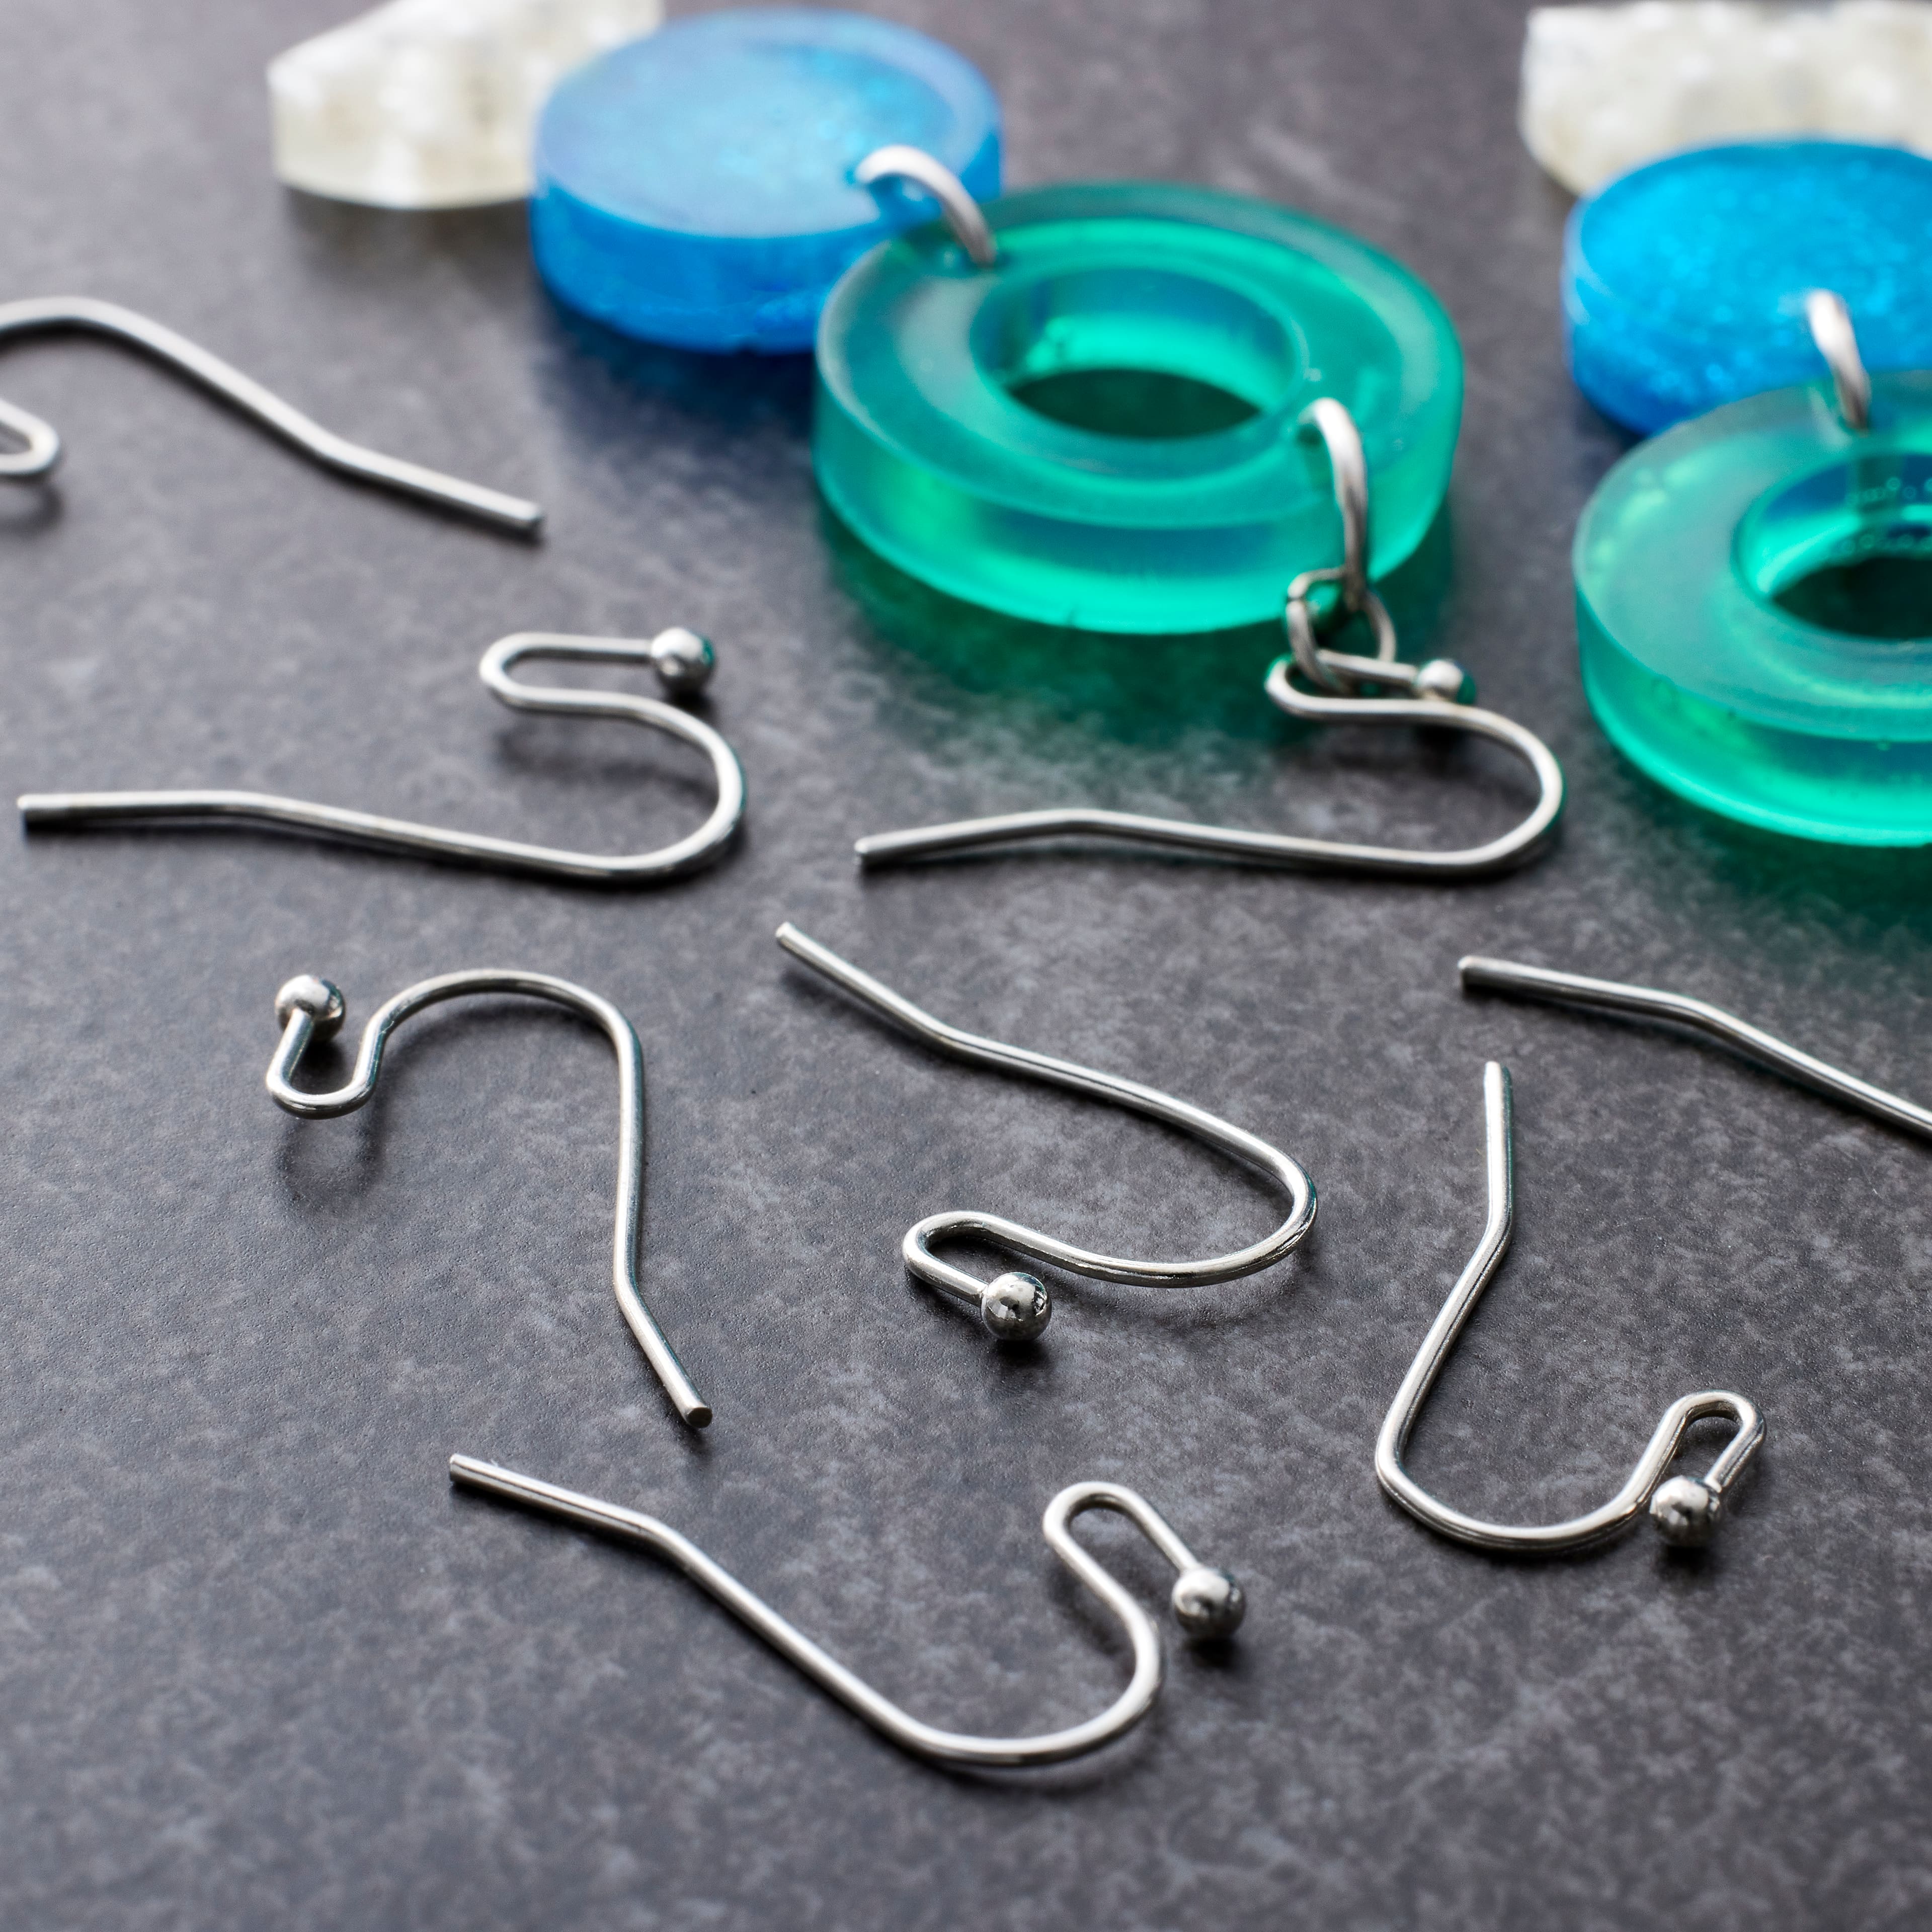 9mm Fish Hook Ear Wires by Bead Landing&#x2122;